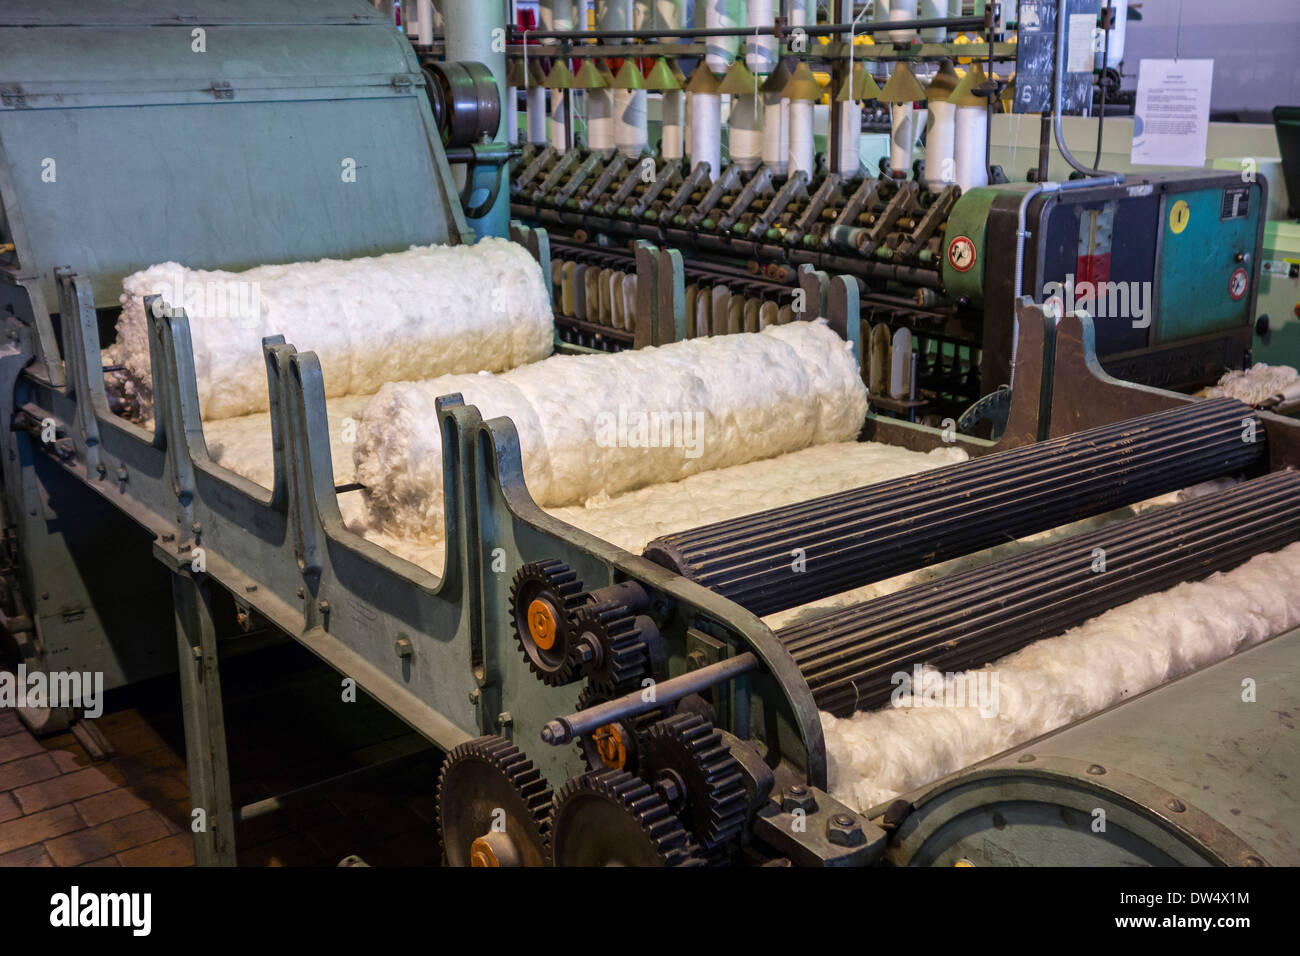 Scutching machine / scutcher separating impurities from the raw cotton fibres in cotton mill at MIAT museum, Ghent, Belgium Stock Photo